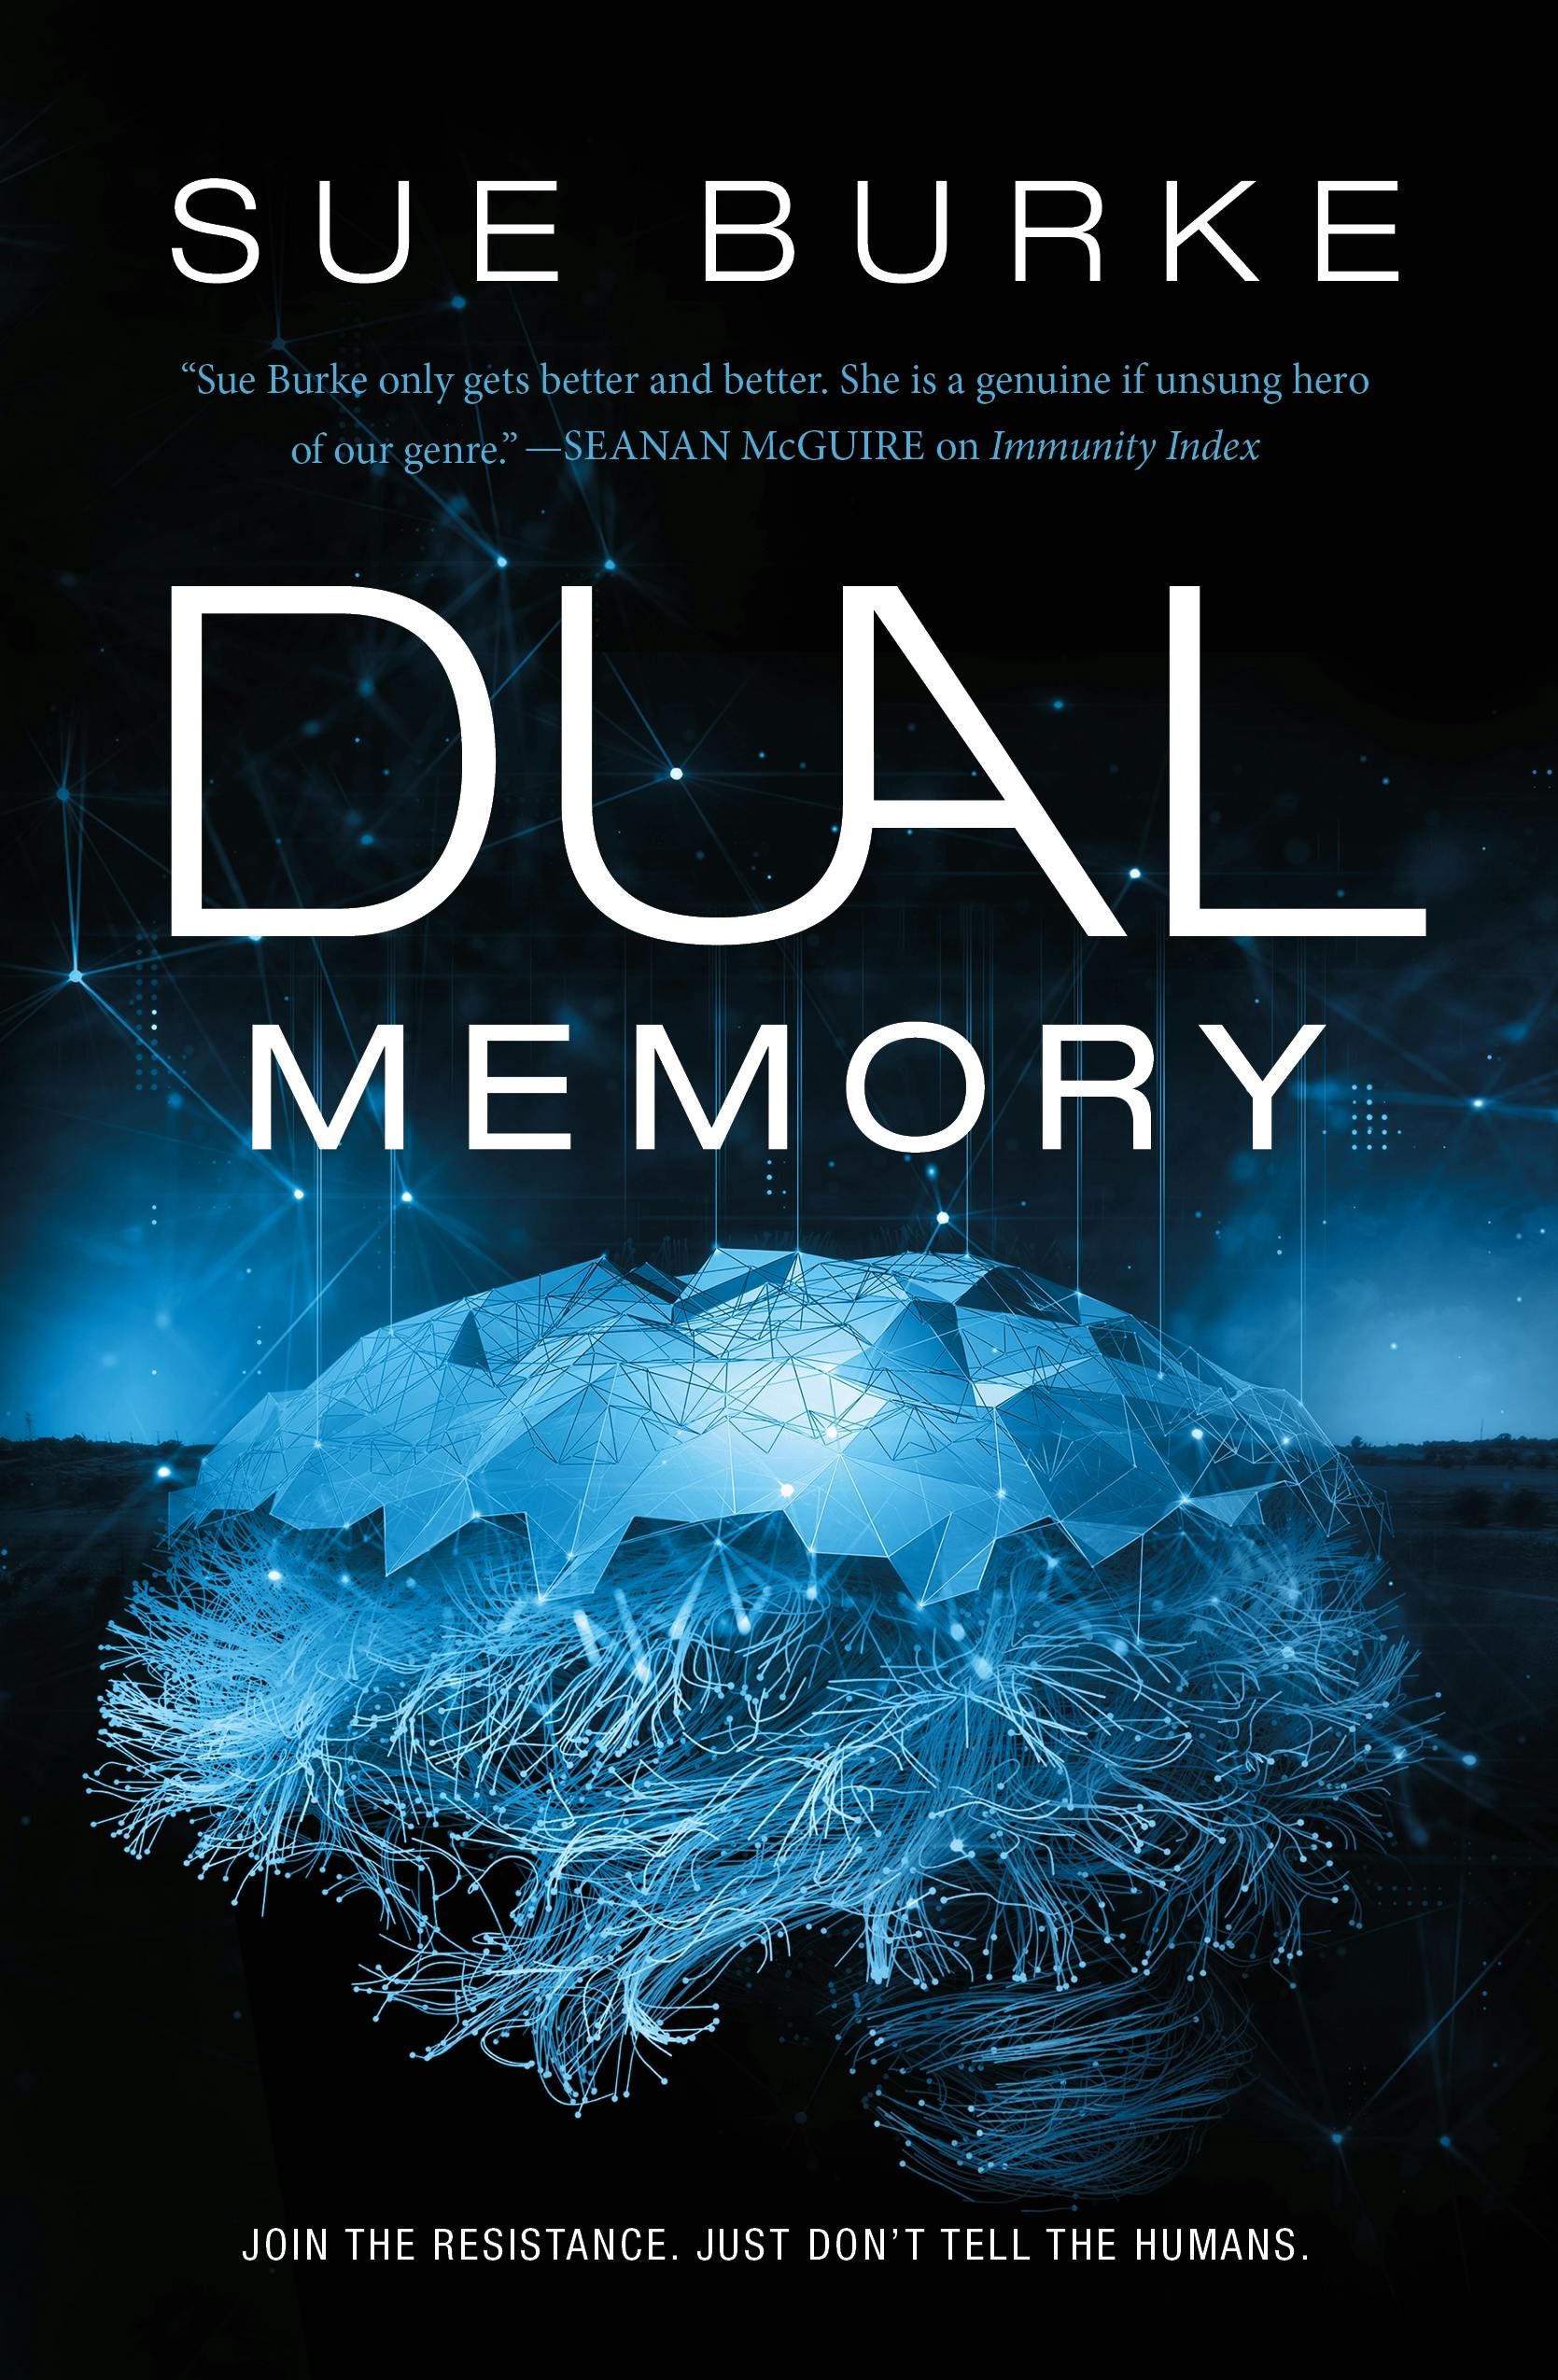 Cover for the book titled as: Dual Memory